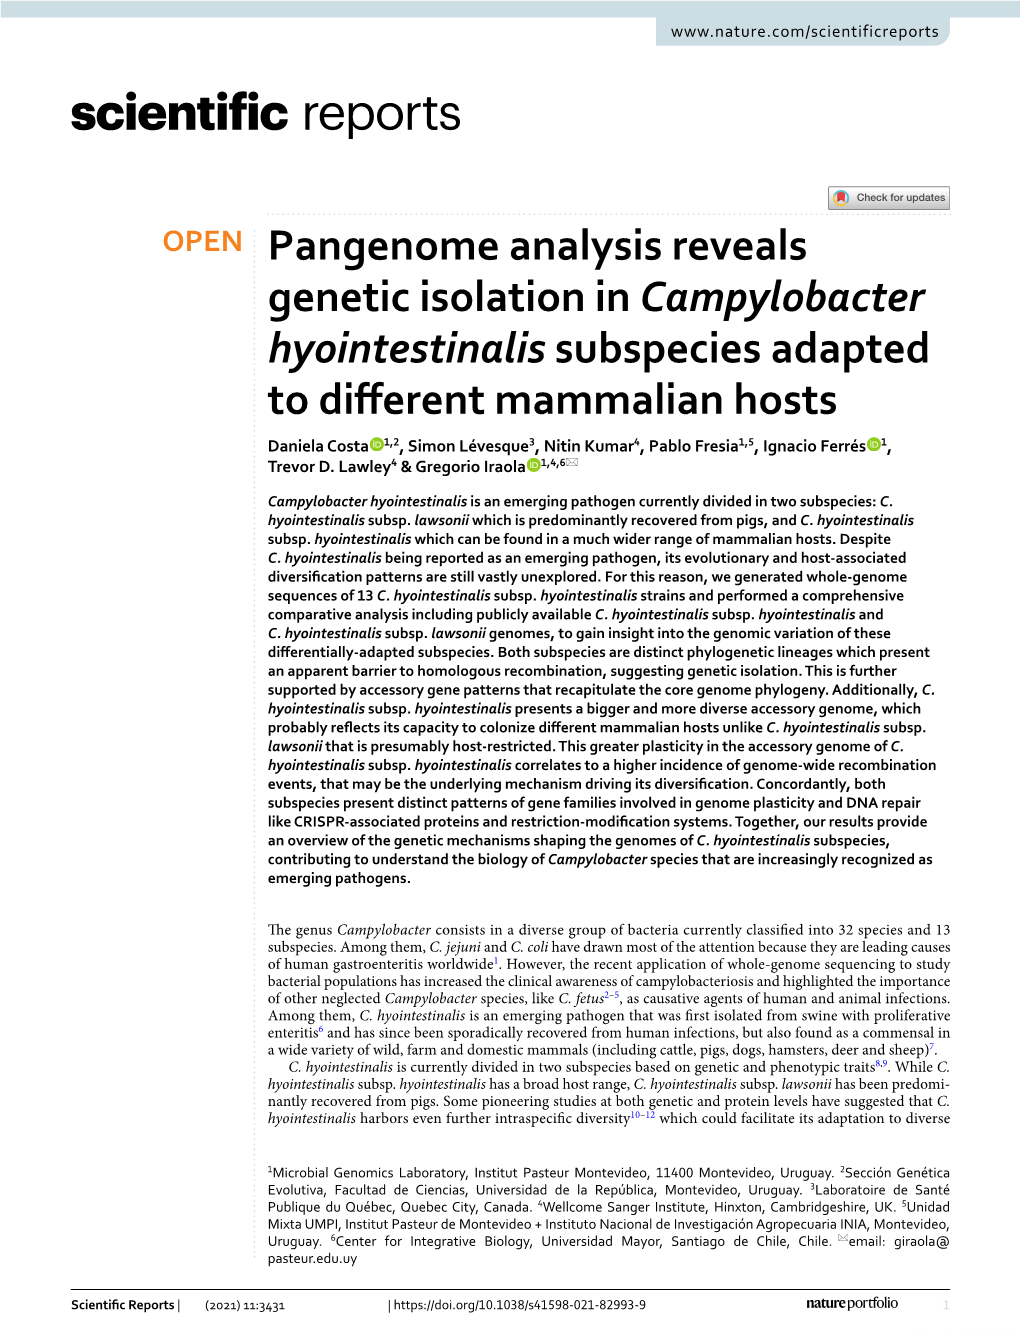 Pangenome Analysis Reveals Genetic Isolation in Campylobacter Hyointestinalis Subspecies Adapted to Different Mammalian Hosts